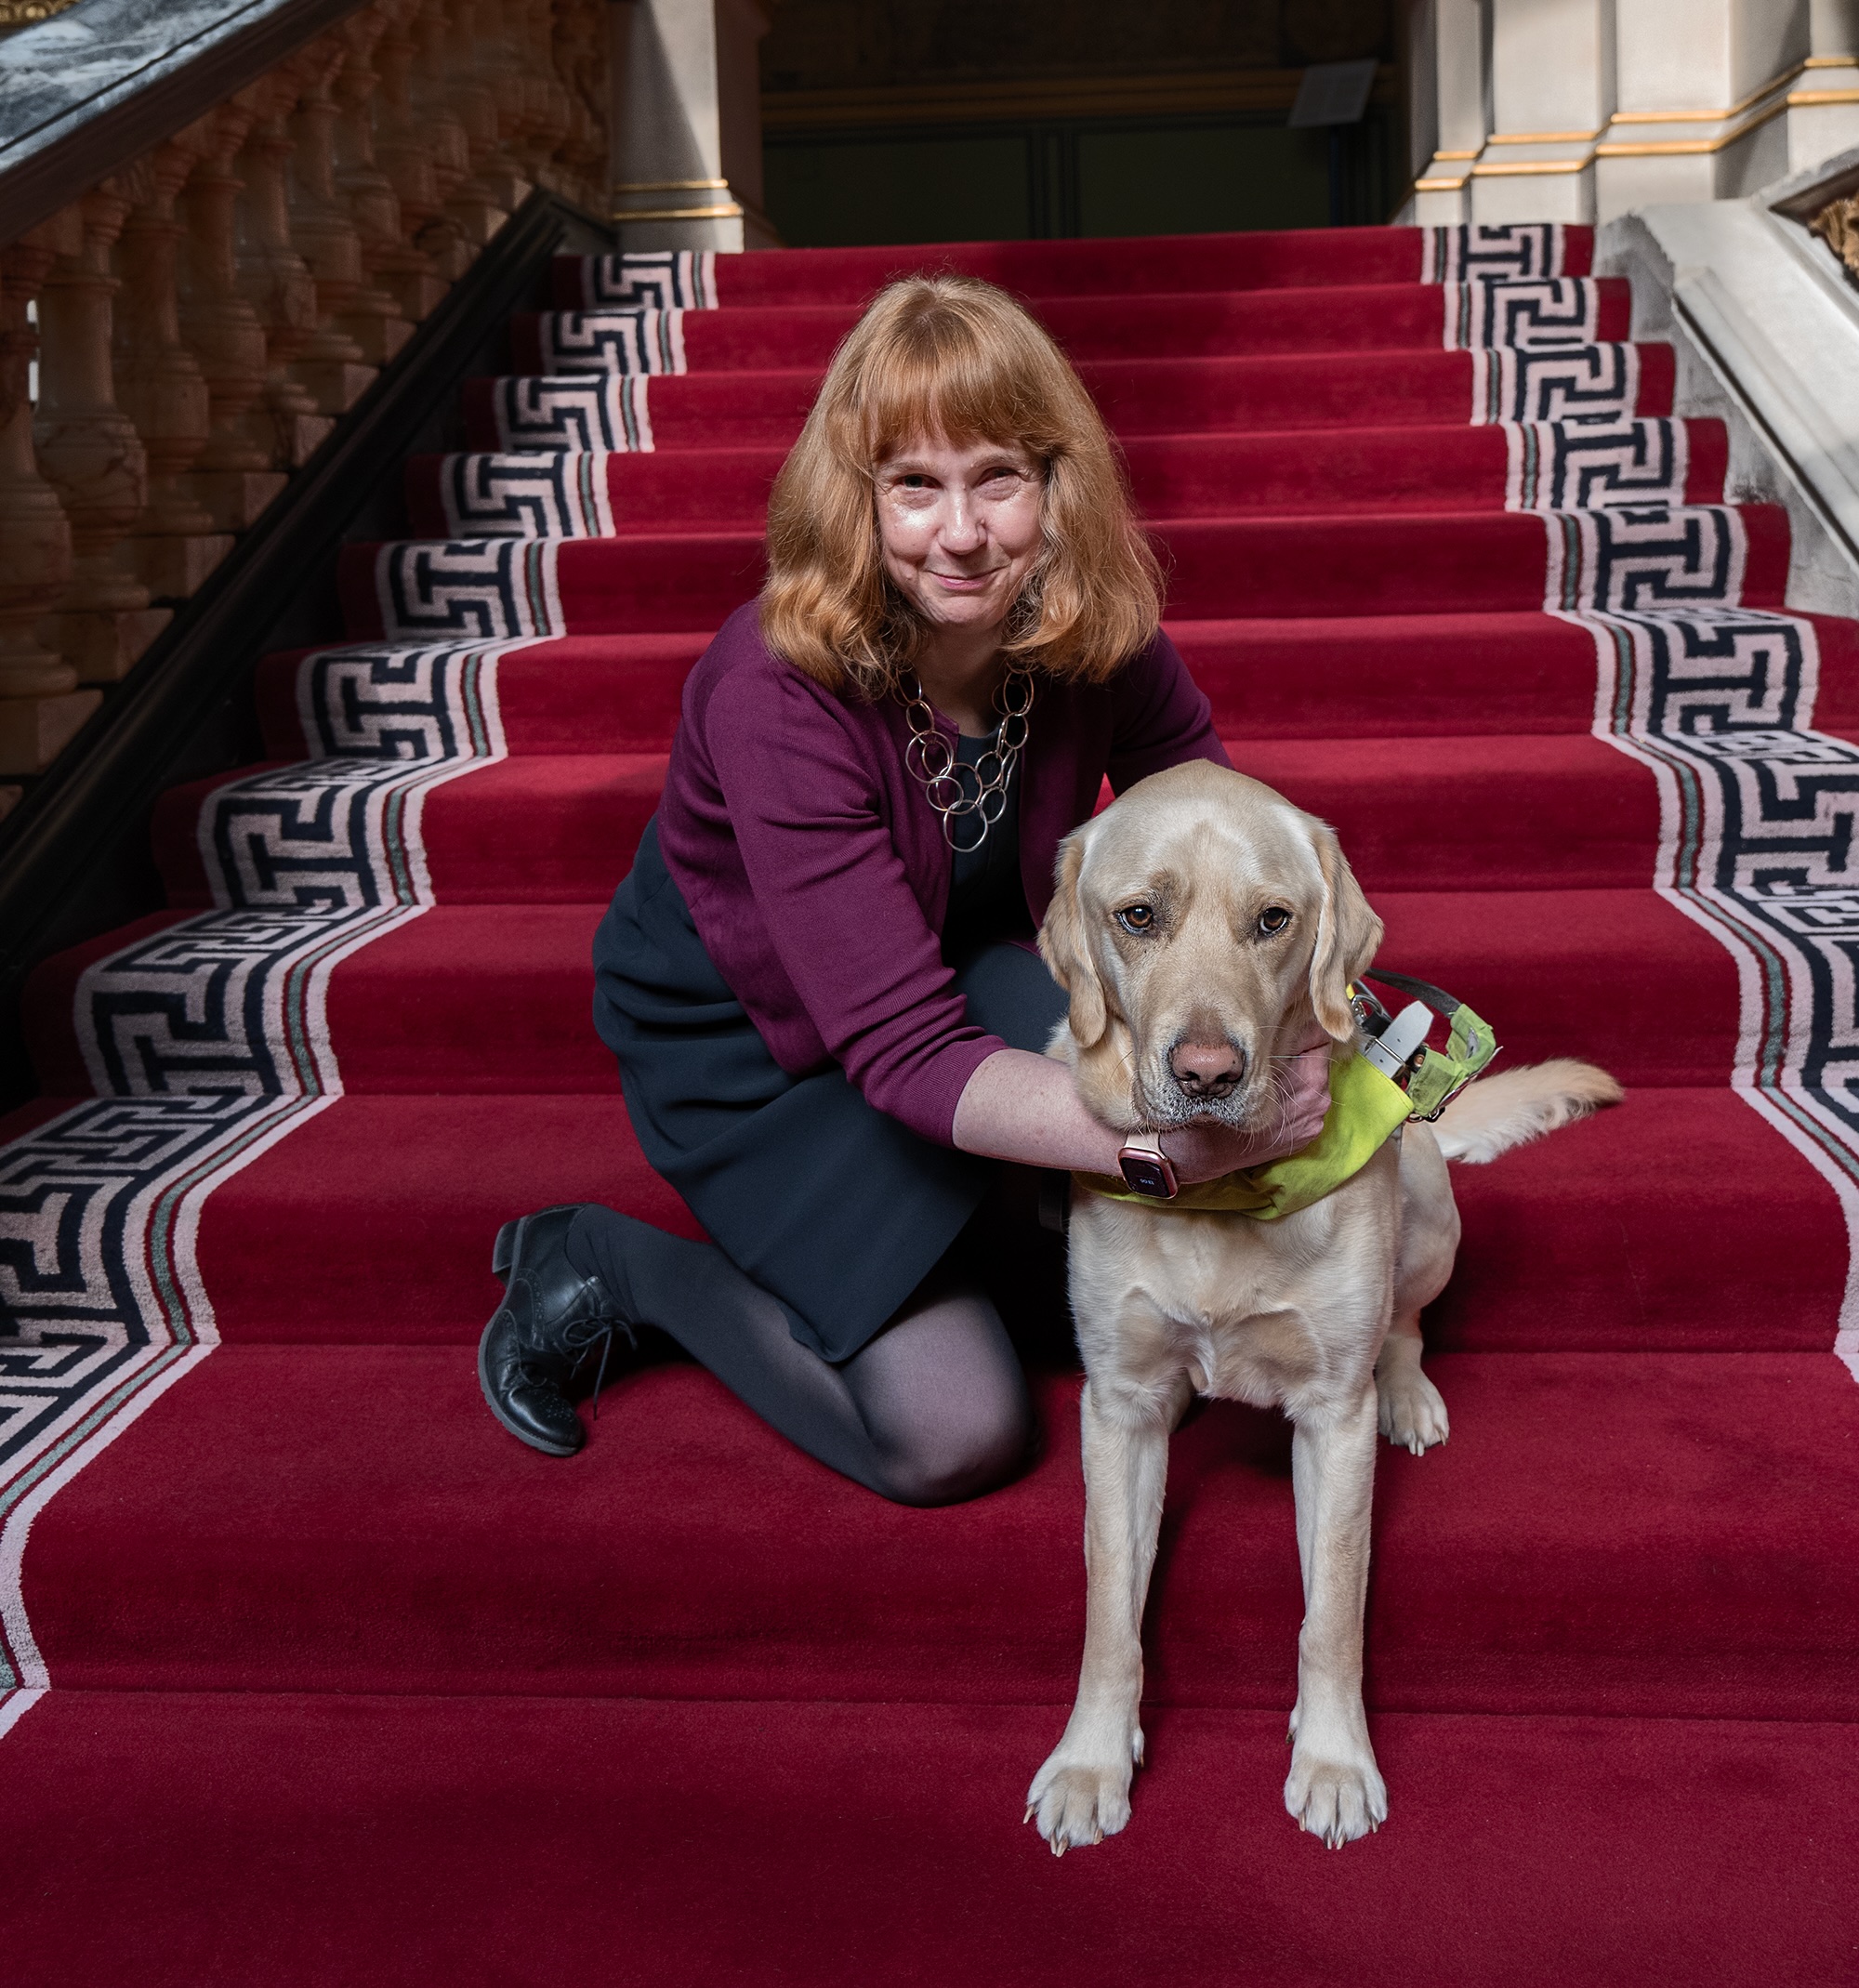 Victoria and Otto sitting on a grand red carpeted staircase